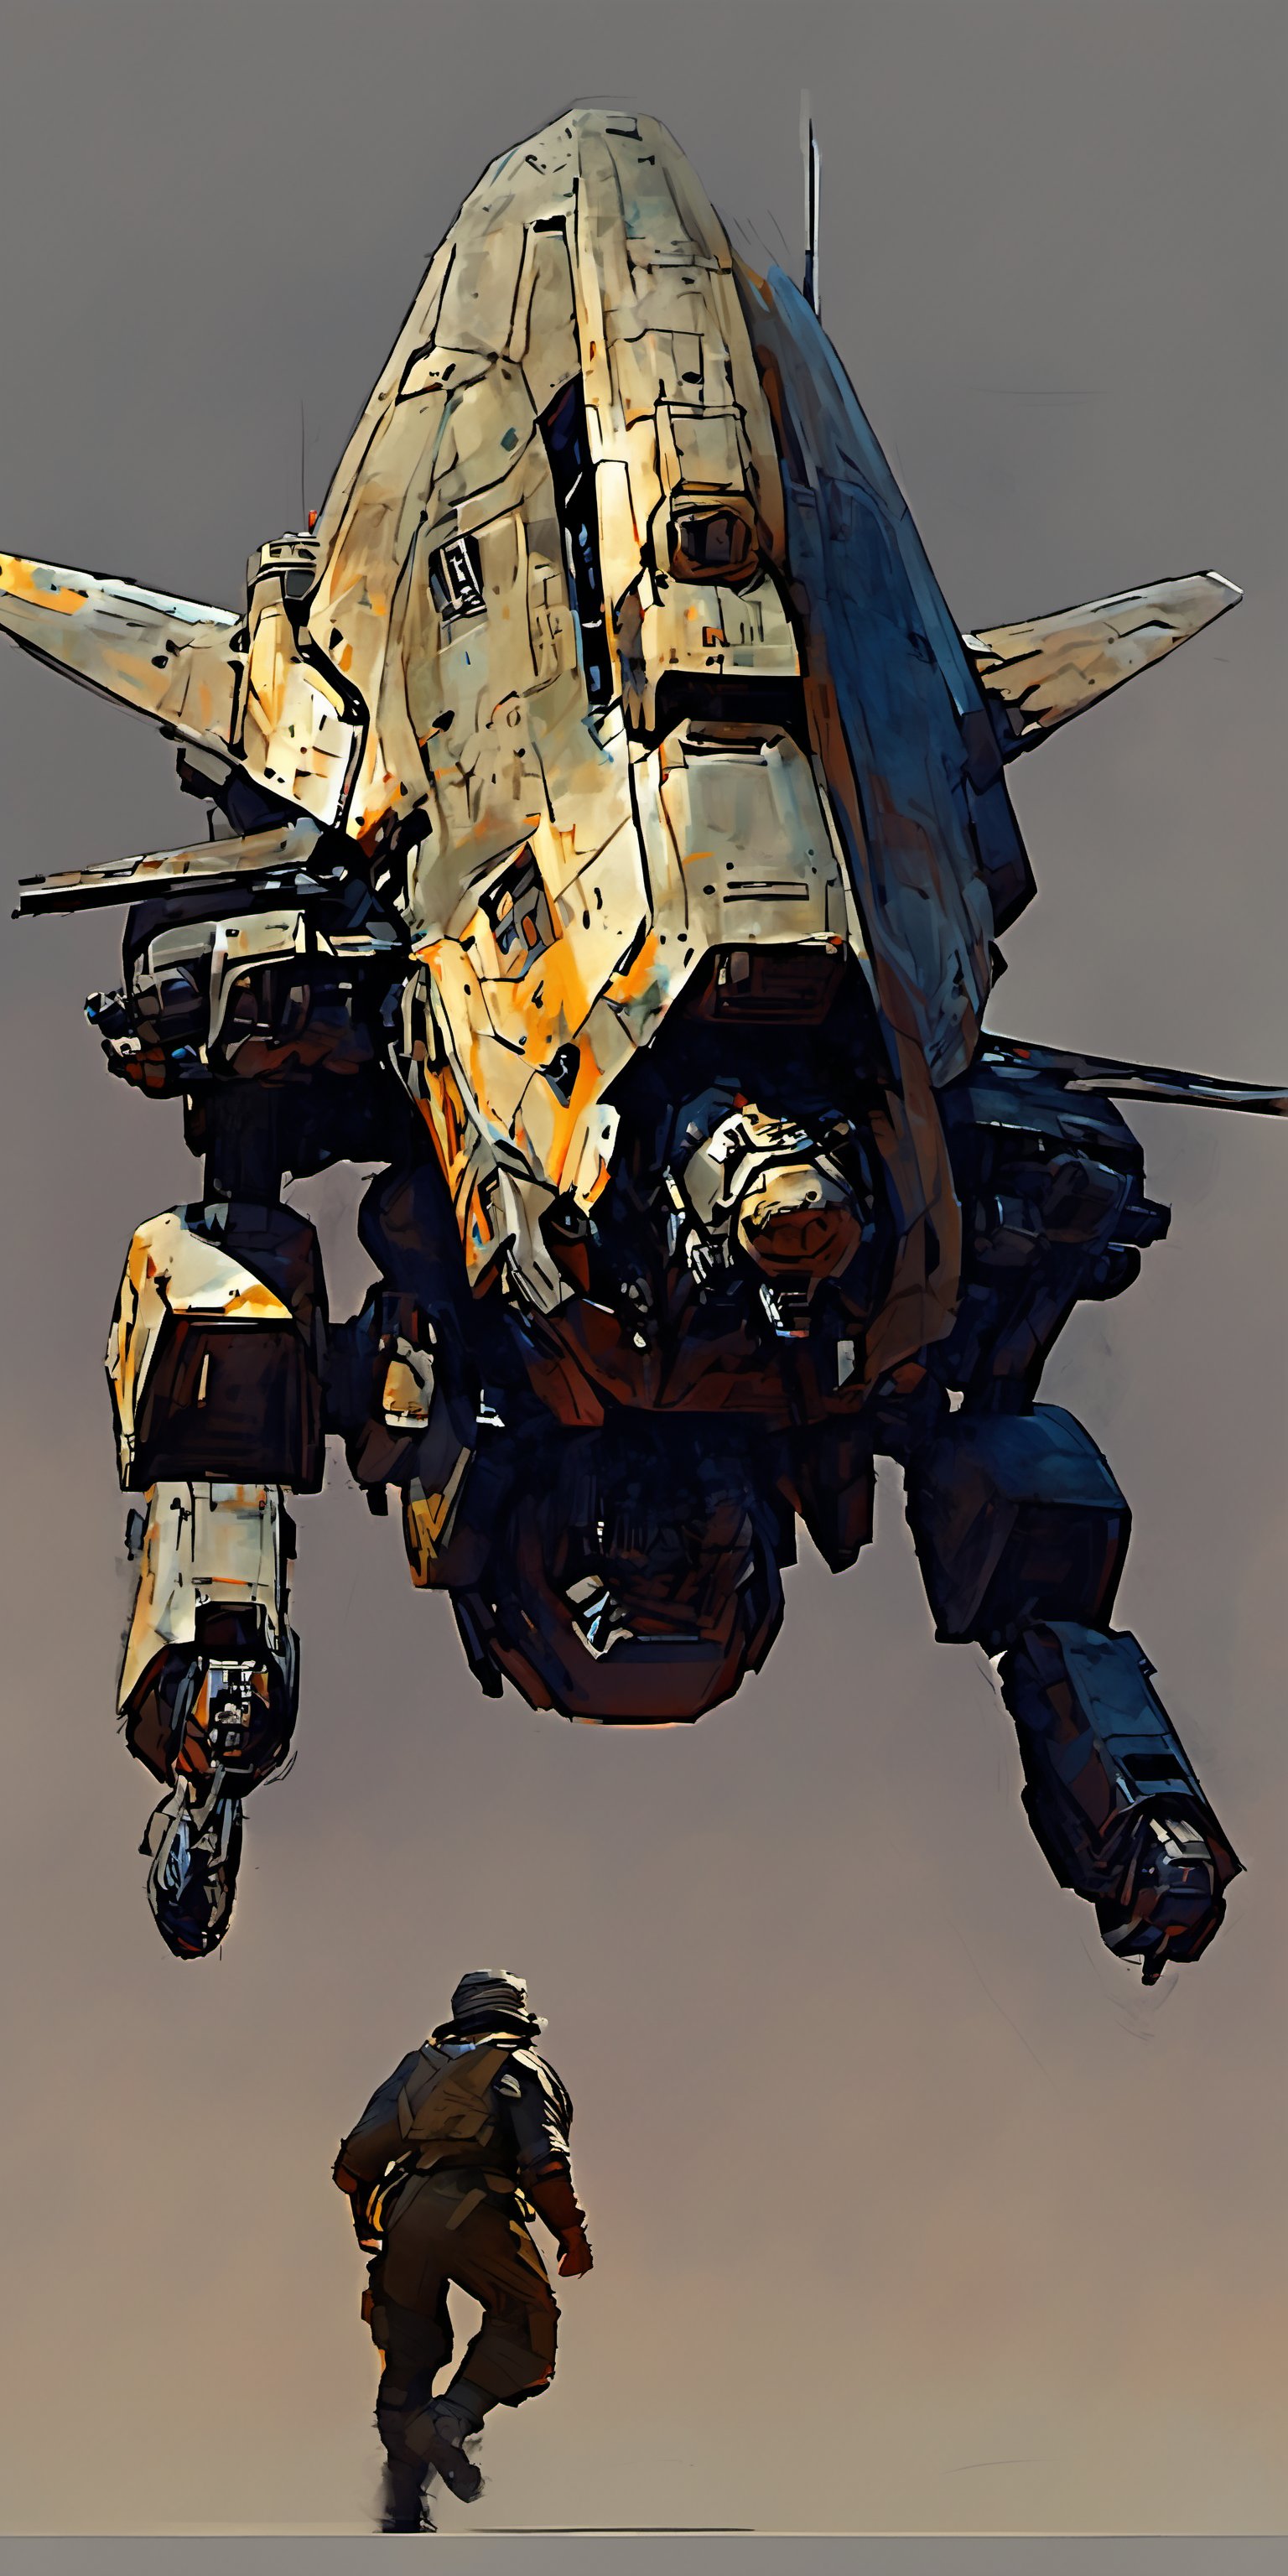 "A detailed illustration of a futuristic, heavily armored mech. The mech is sleek and powerful with a robust, reinforced body featuring a mix of metallic and camouflaged panels. It has multiple weapon systems, including large cannons and smaller auxiliary guns, integrated into its design. The mech floats using anti-gravity systems designed for both mobility and stability. The background is neutral, focusing entirely on the detailed design and features of the mech."